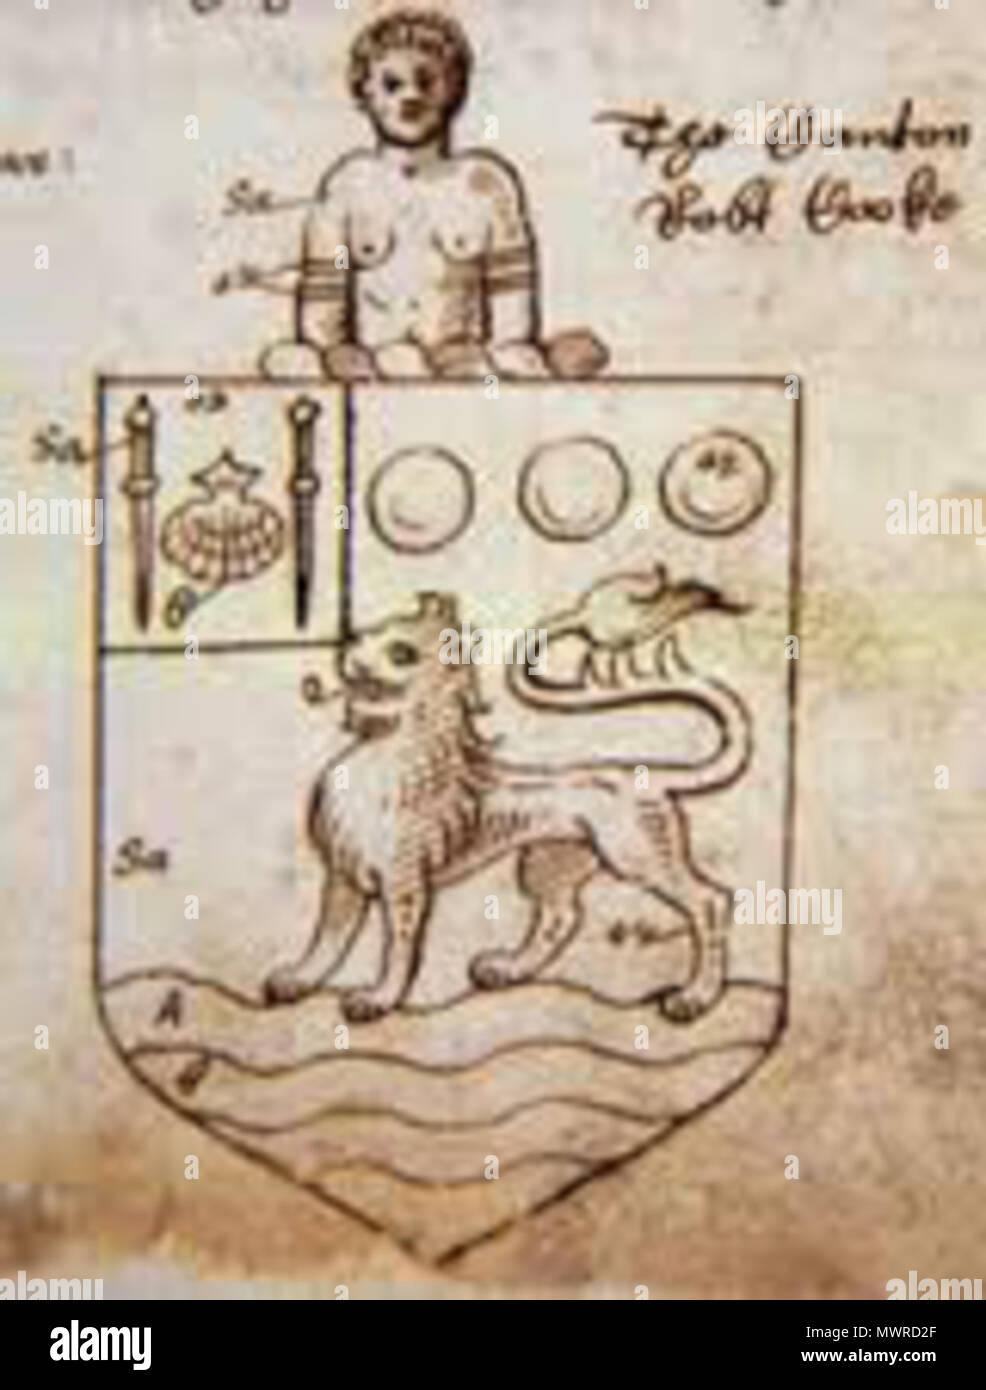 . English: The later grant of arms to John Hawkins in 1571, with the addition bearing heraldic symbols related to Riohacha, Colombia (then Rio de la Hacha), for his notable victory there, the addition being; on a canton or, an escallop between two palmers staves sable. Note the lion in the grant of arms is describes as passant, but in the accompanying illustration is statant. 4 January 1571. Robert Cook 561 Sir john hawkins later arms Stock Photo